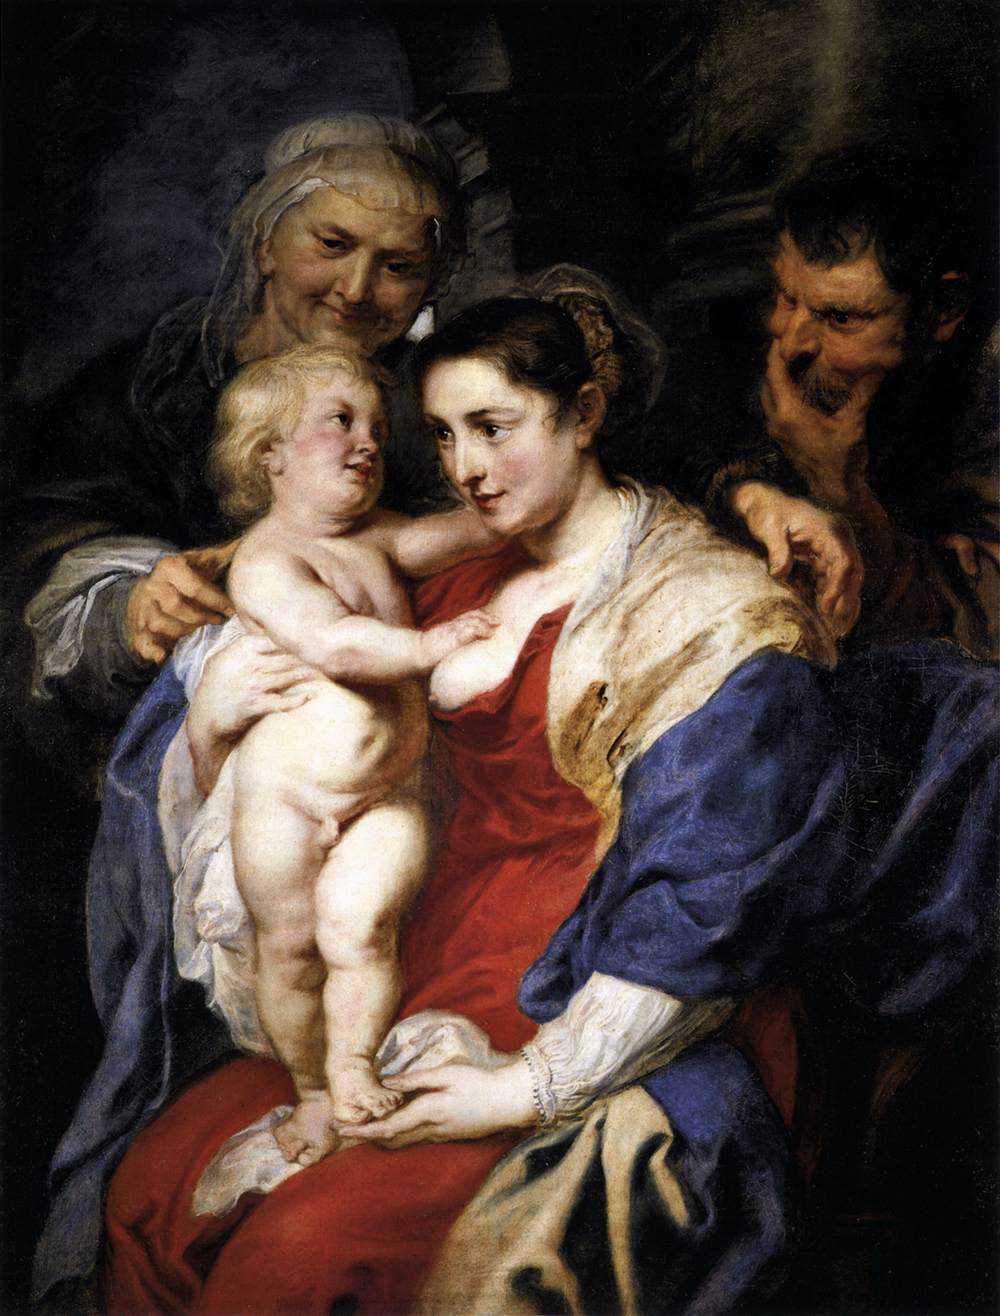 The Holy Family with St. Anne by Peter Paul Rubens Reproduction Oil Painting on Canvas